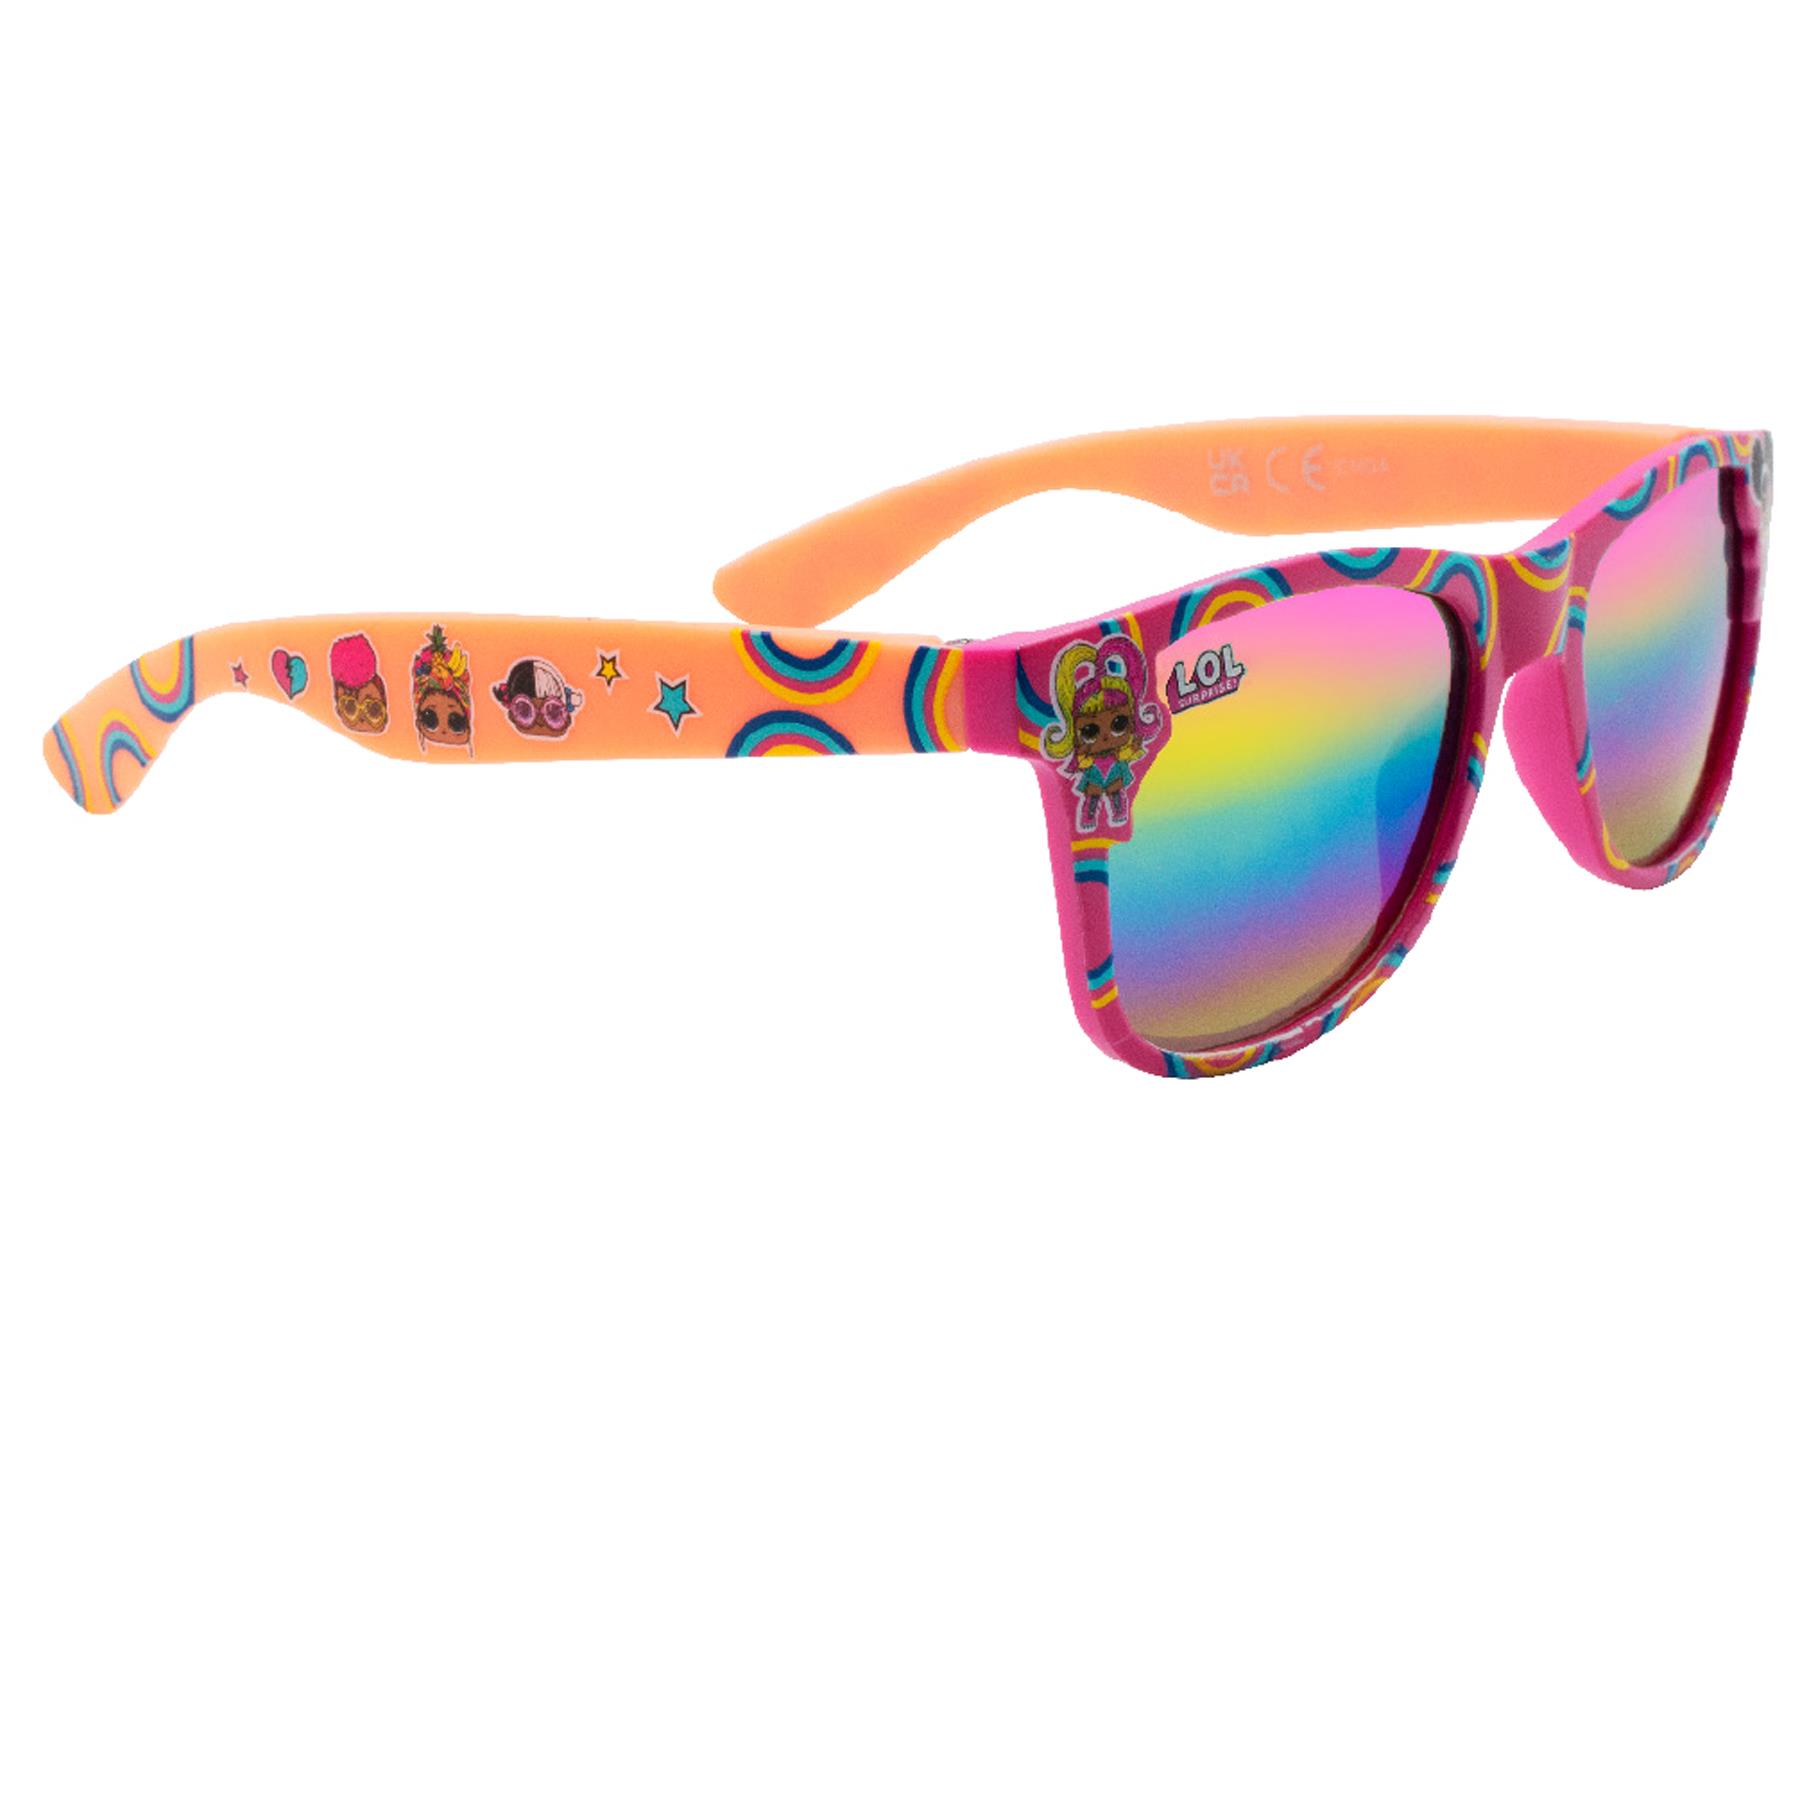 LOL Children's Character Sunglasses UV protection for Holiday - LOL1